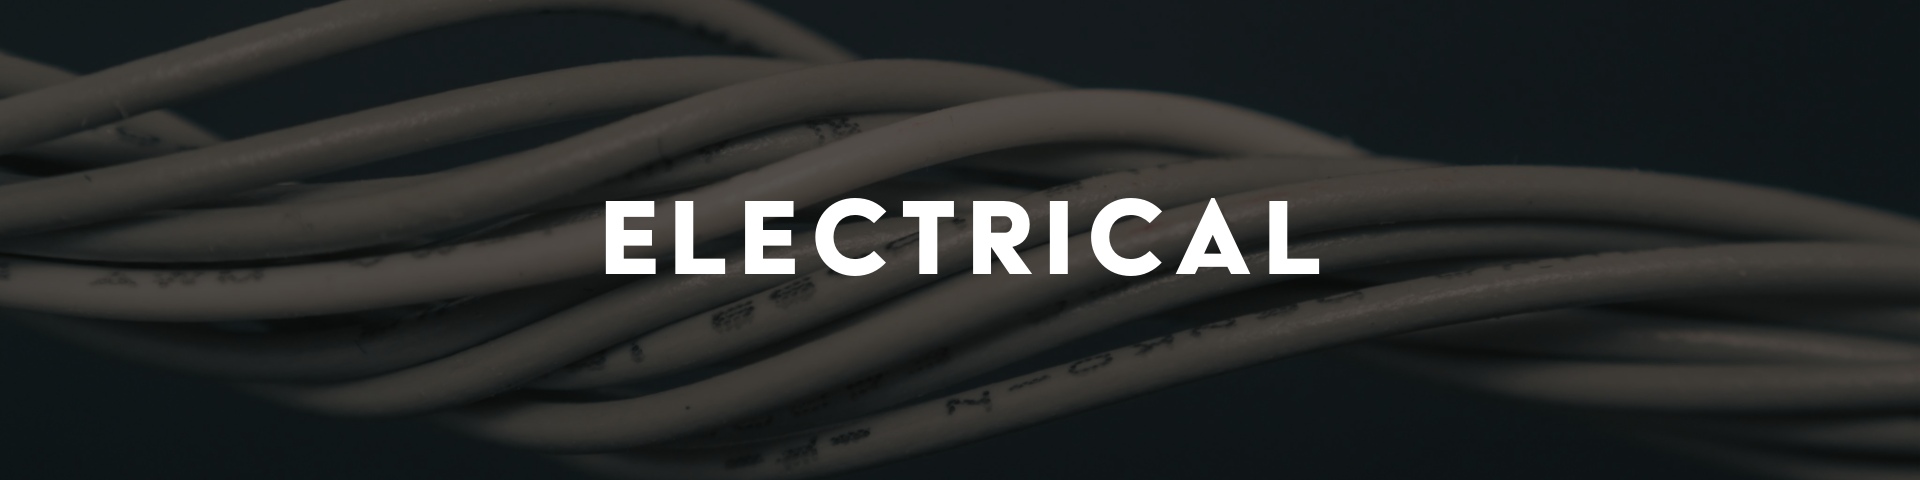 electrical 